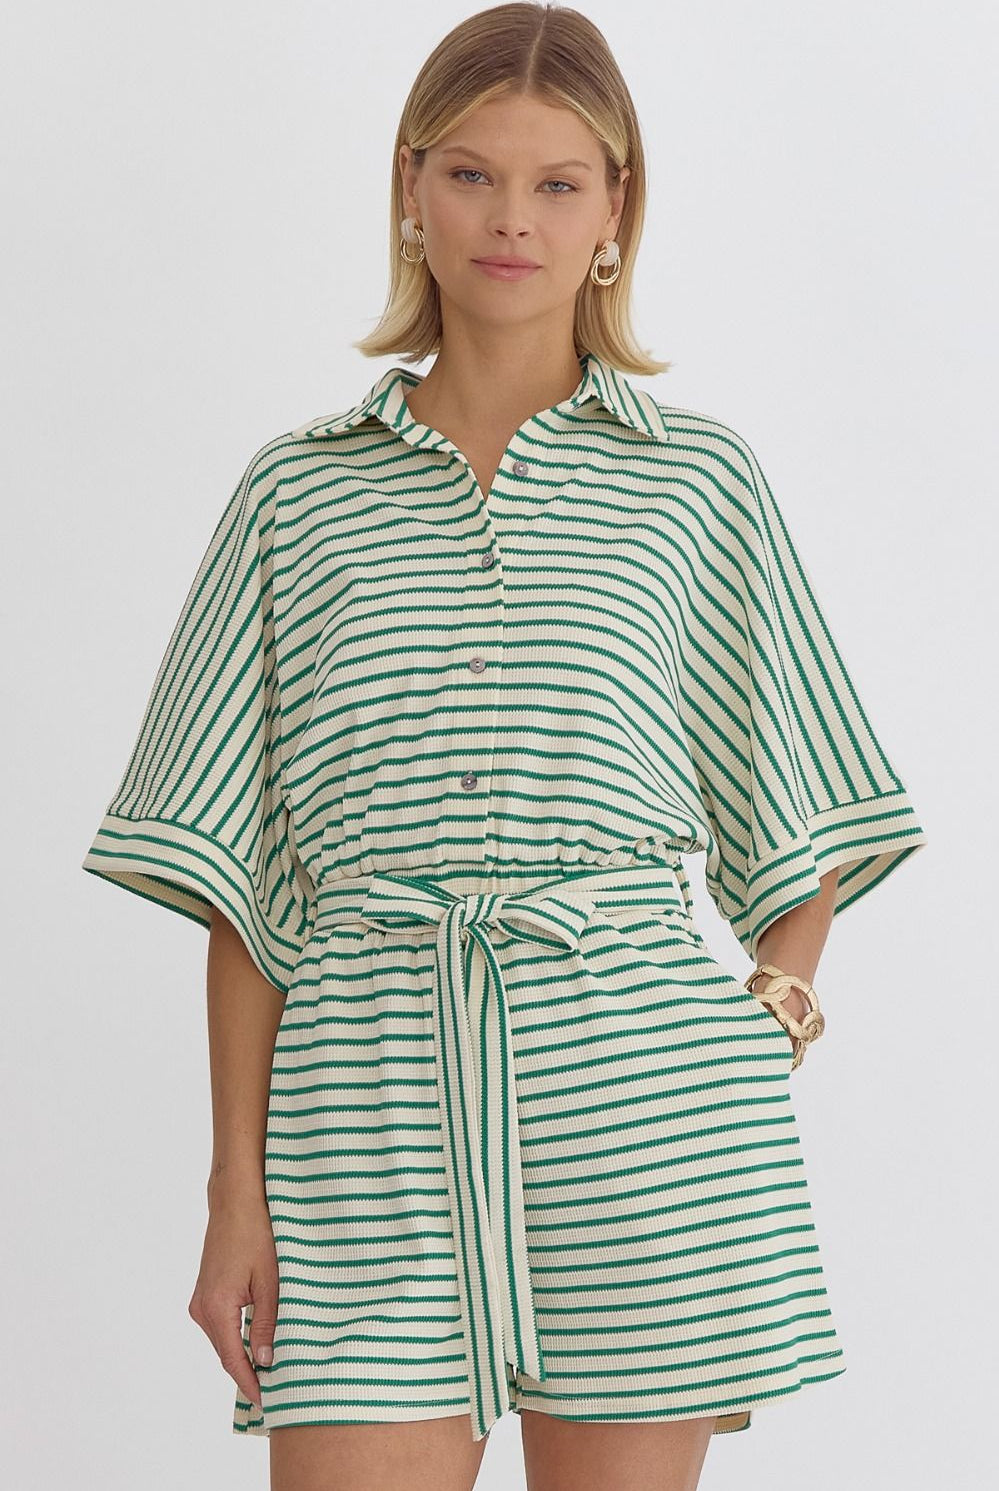 Adalin Textured Stripe Button Down Collared Romper - Be You Boutique